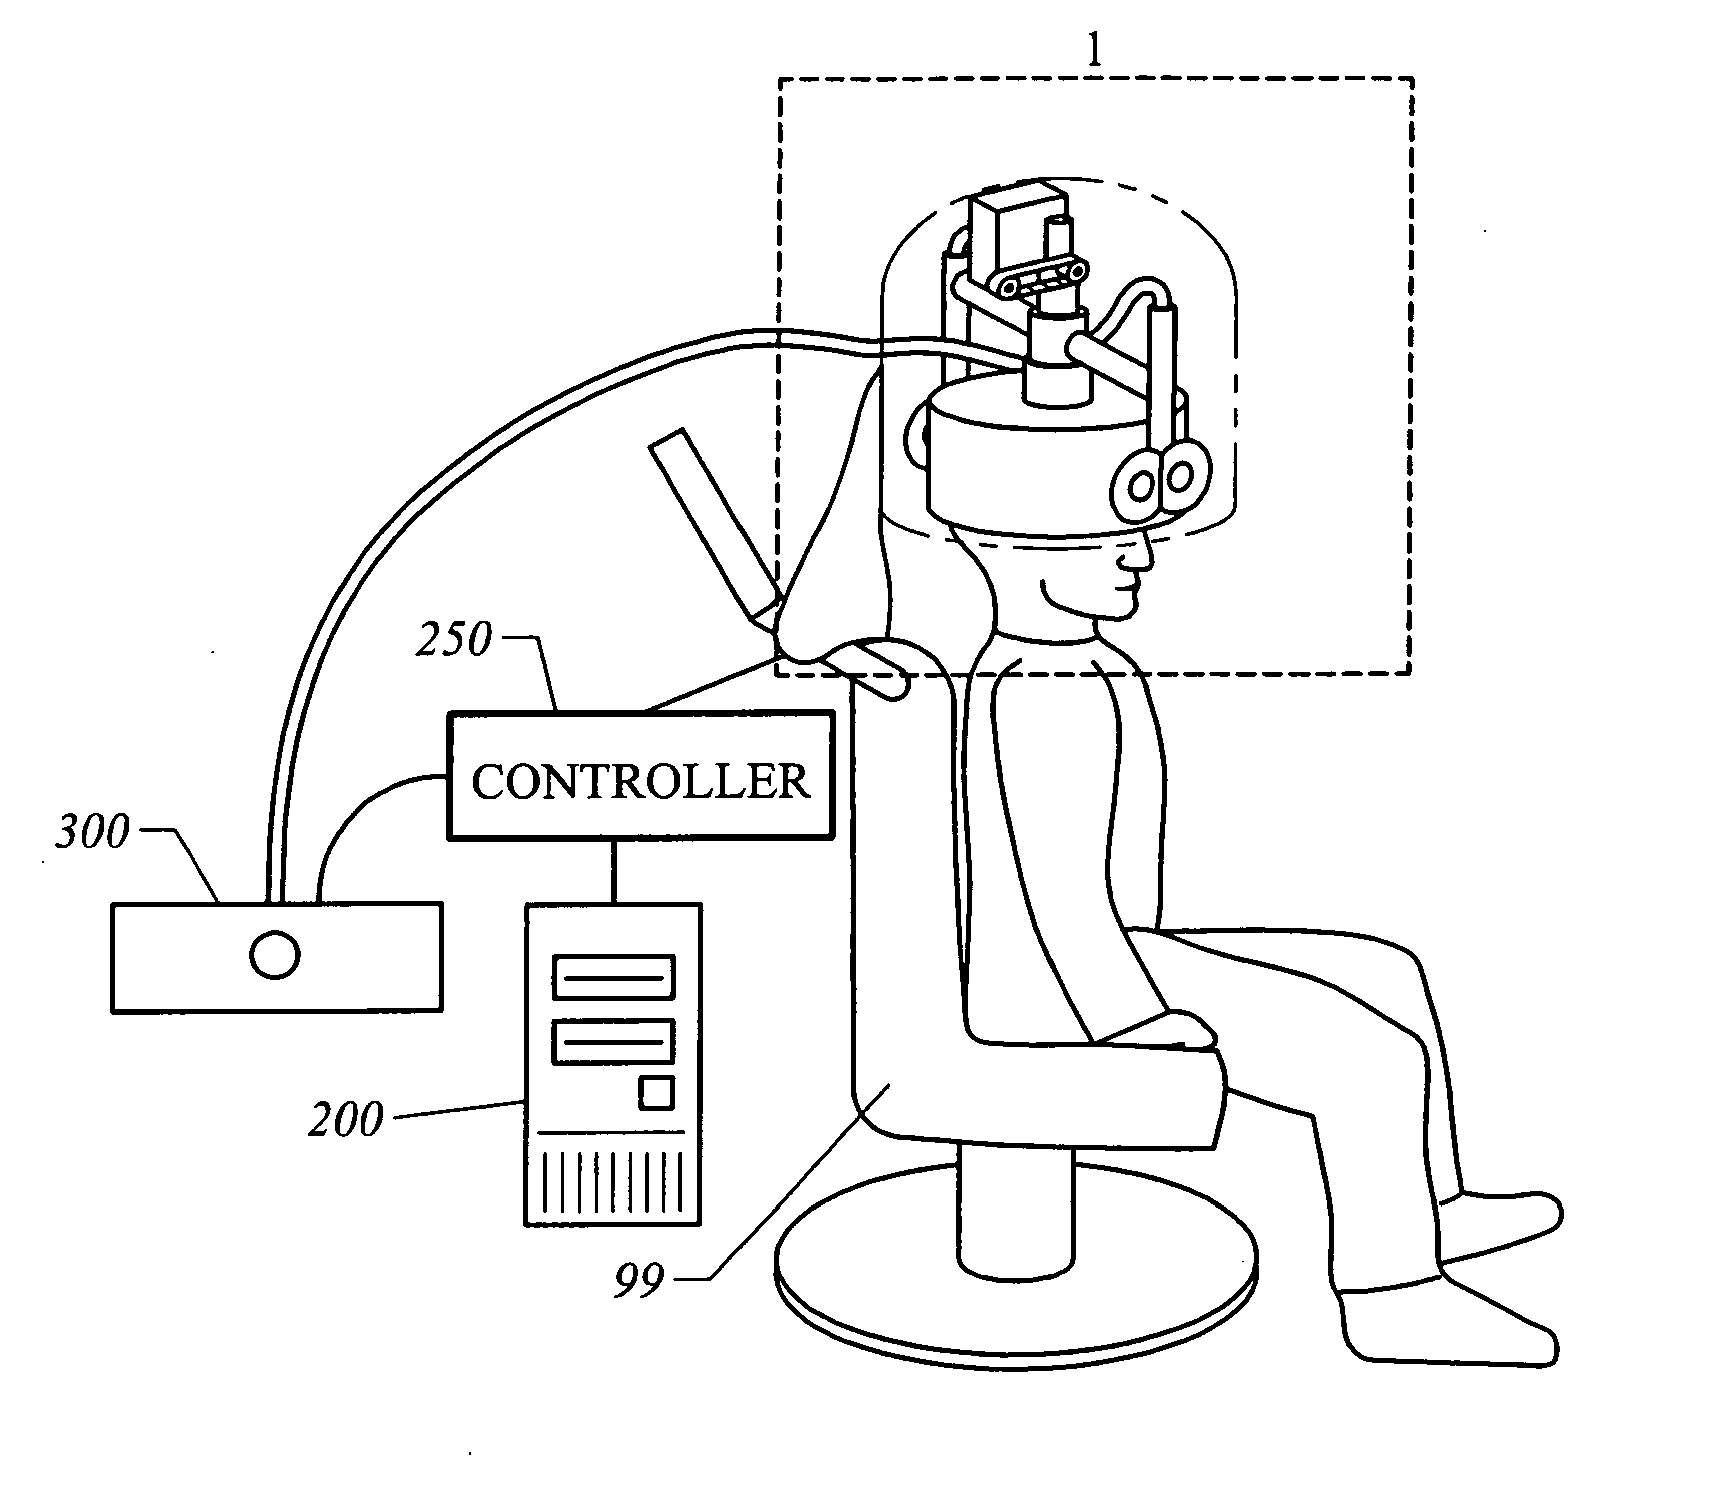 Robotic apparatus for targeting and producing deep, focused transcranial magnetic stimulation